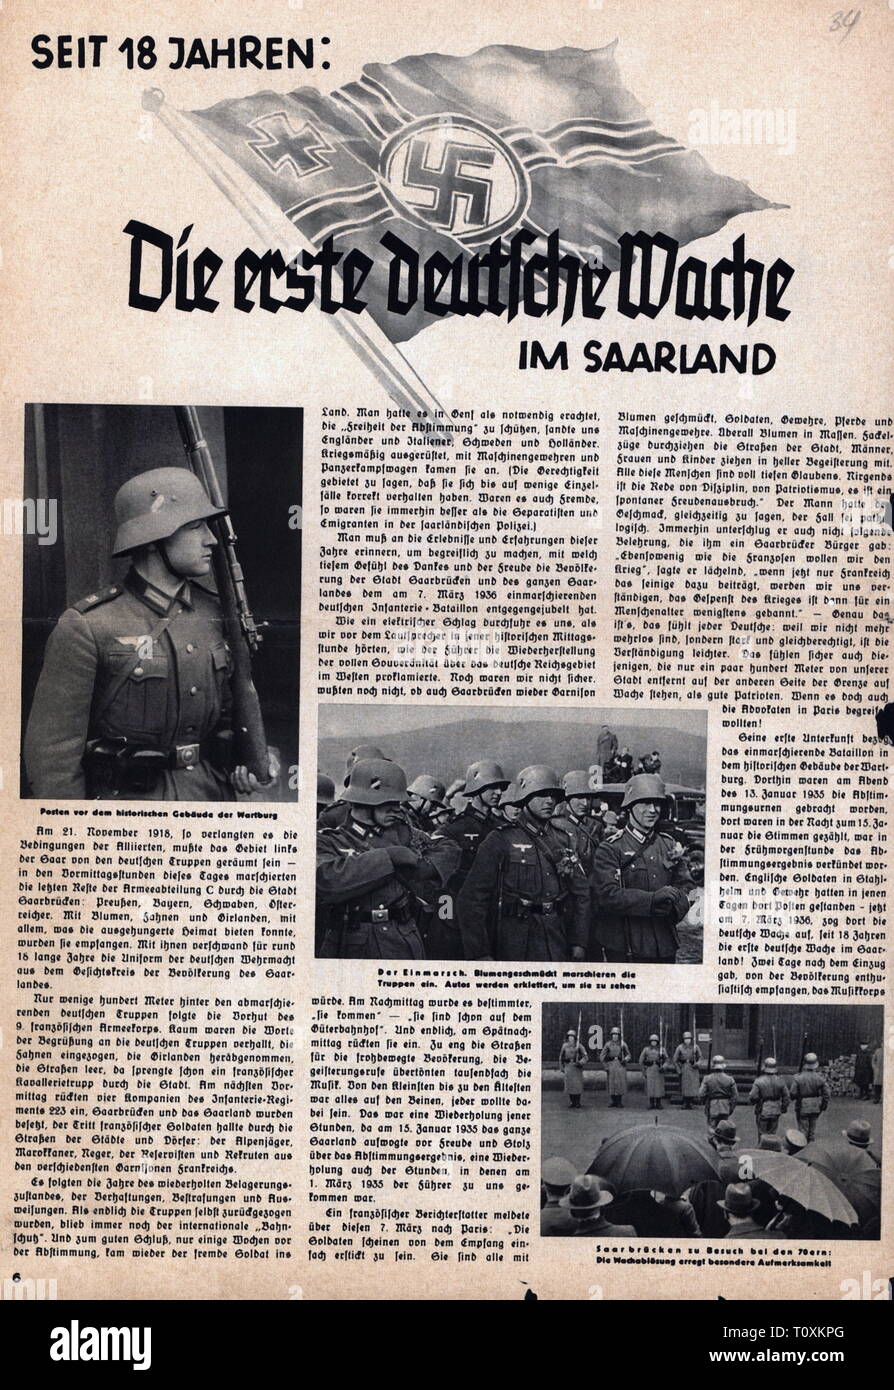 Nazism / National Socialism, politics, integration of the Saarland, 1935, article, 'The first German guard in the Saarland', March 1935, Territory of the Saar Basin, reincorporation, entry, marching in, military, soldiers, soldier, Wehrmacht, German armed forces, 38. infantry regiment, Reichskriegsflagge, imperial war flag, flag, flags, swastika, swastikas, people, press, presses, journal, Germany, German Reich, Third Reich, 20th century, 1930s, politics, policy, social integration, economic integration, article, articles, historic, historical, Additional-Rights-Clearance-Info-Not-Available Stock Photo